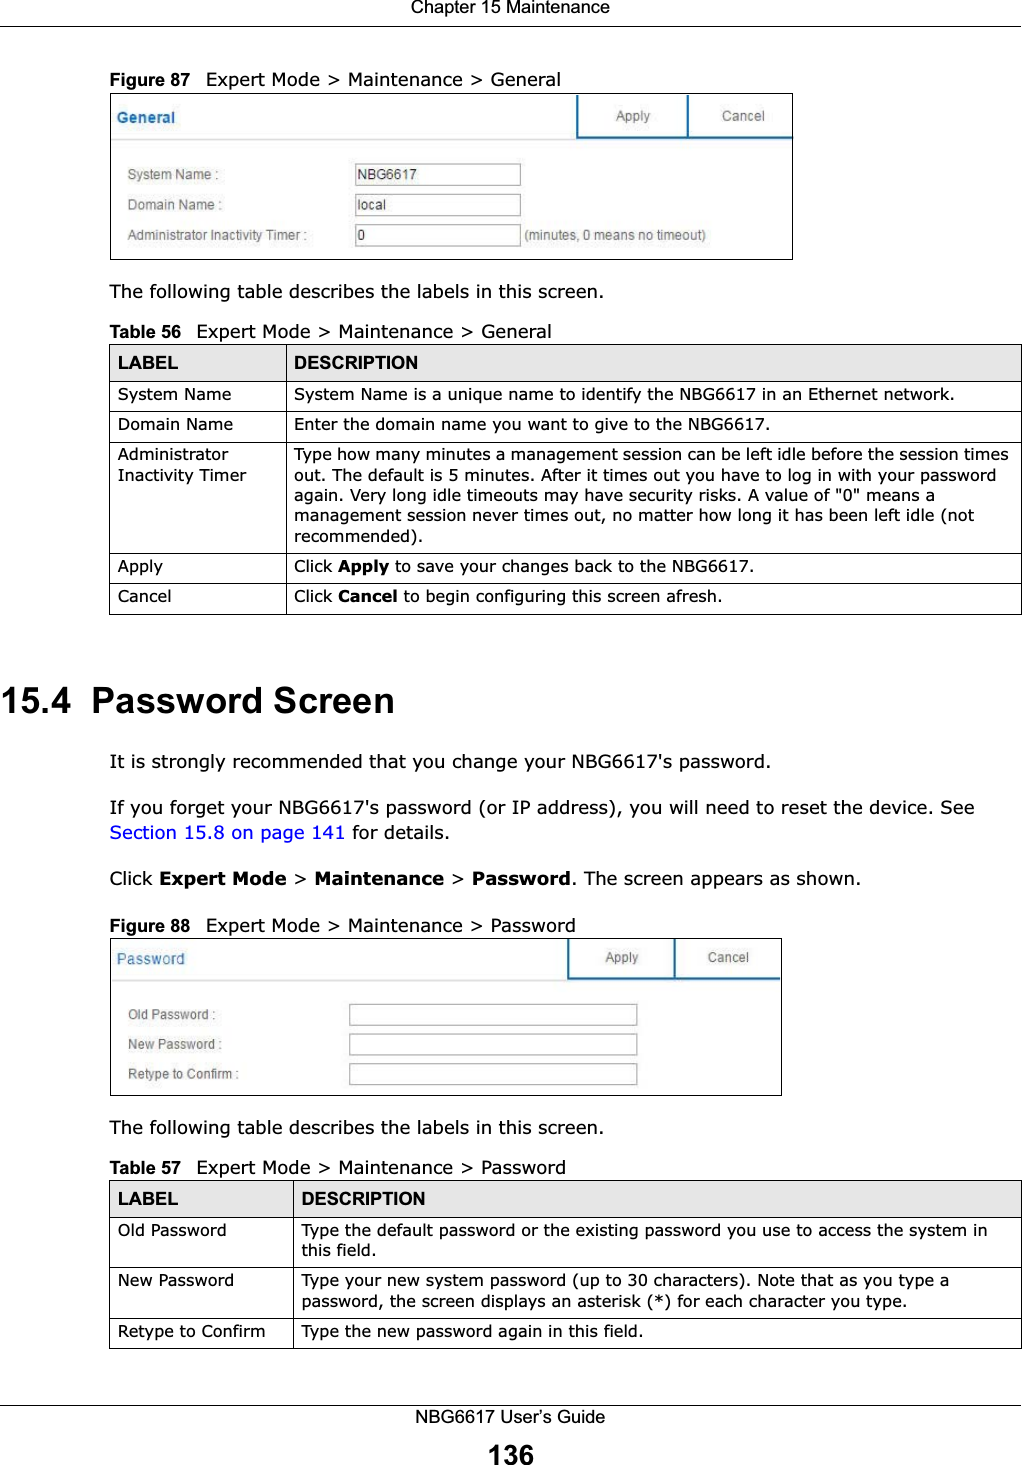 Chapter 15 MaintenanceNBG6617 User’s Guide136Figure 87   Expert Mode &gt; Maintenance &gt; General The following table describes the labels in this screen.15.4  Password ScreenIt is strongly recommended that you change your NBG6617&apos;s password. If you forget your NBG6617&apos;s password (or IP address), you will need to reset the device. See Section 15.8 on page 141 for details.Click Expert Mode &gt; Maintenance &gt; Password. The screen appears as shown.Figure 88   Expert Mode &gt; Maintenance &gt; Password The following table describes the labels in this screen.Table 56   Expert Mode &gt; Maintenance &gt; GeneralLABEL DESCRIPTIONSystem Name System Name is a unique name to identify the NBG6617 in an Ethernet network.Domain Name Enter the domain name you want to give to the NBG6617.Administrator Inactivity TimerType how many minutes a management session can be left idle before the session times out. The default is 5 minutes. After it times out you have to log in with your password again. Very long idle timeouts may have security risks. A value of &quot;0&quot; means a management session never times out, no matter how long it has been left idle (not recommended).Apply Click Apply to save your changes back to the NBG6617.Cancel Click Cancel to begin configuring this screen afresh.Table 57   Expert Mode &gt; Maintenance &gt; PasswordLABEL DESCRIPTIONOld Password Type the default password or the existing password you use to access the system in this field.New Password Type your new system password (up to 30 characters). Note that as you type a password, the screen displays an asterisk (*) for each character you type.Retype to Confirm Type the new password again in this field.